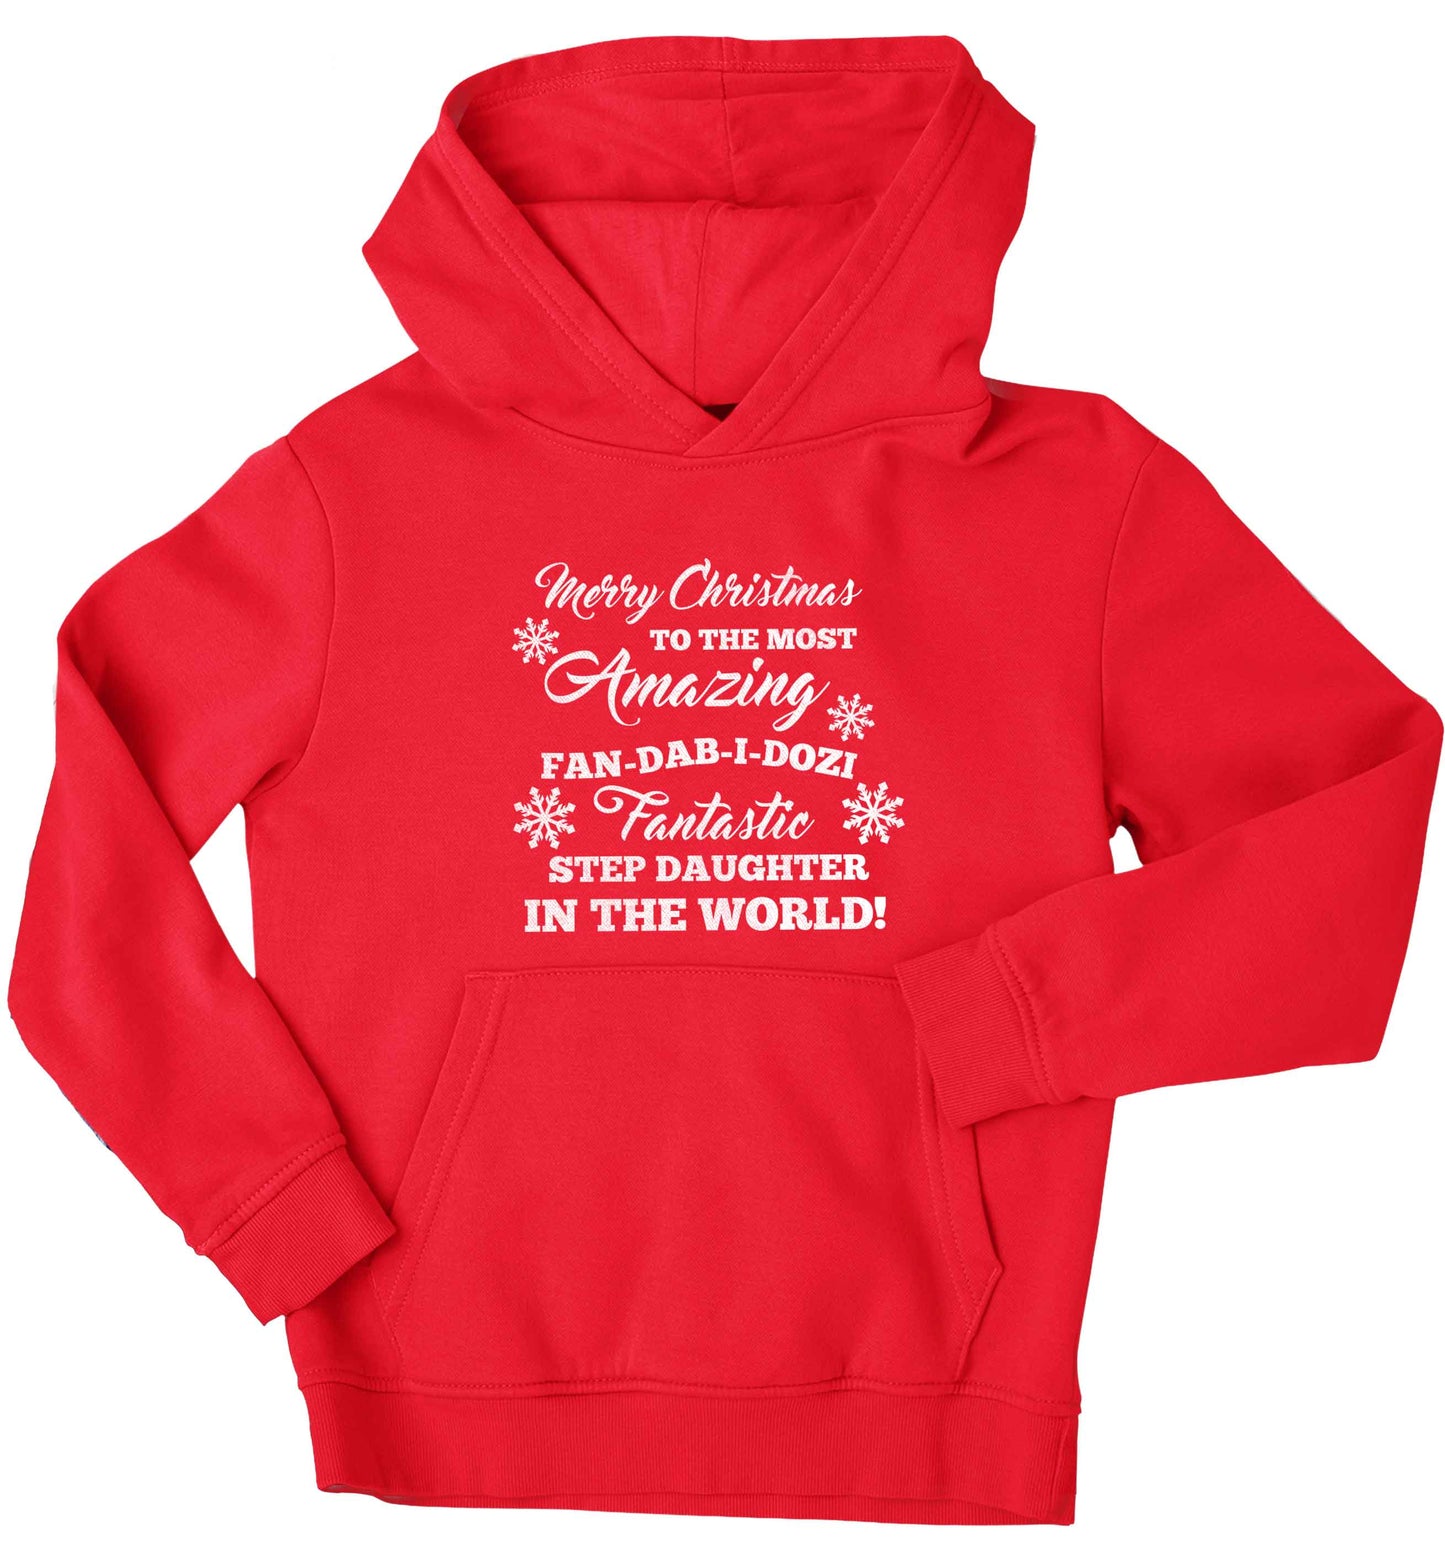 Merry Christmas to the most amazing fan-dab-i-dozi fantasic Step Daughter in the world children's red hoodie 12-13 Years